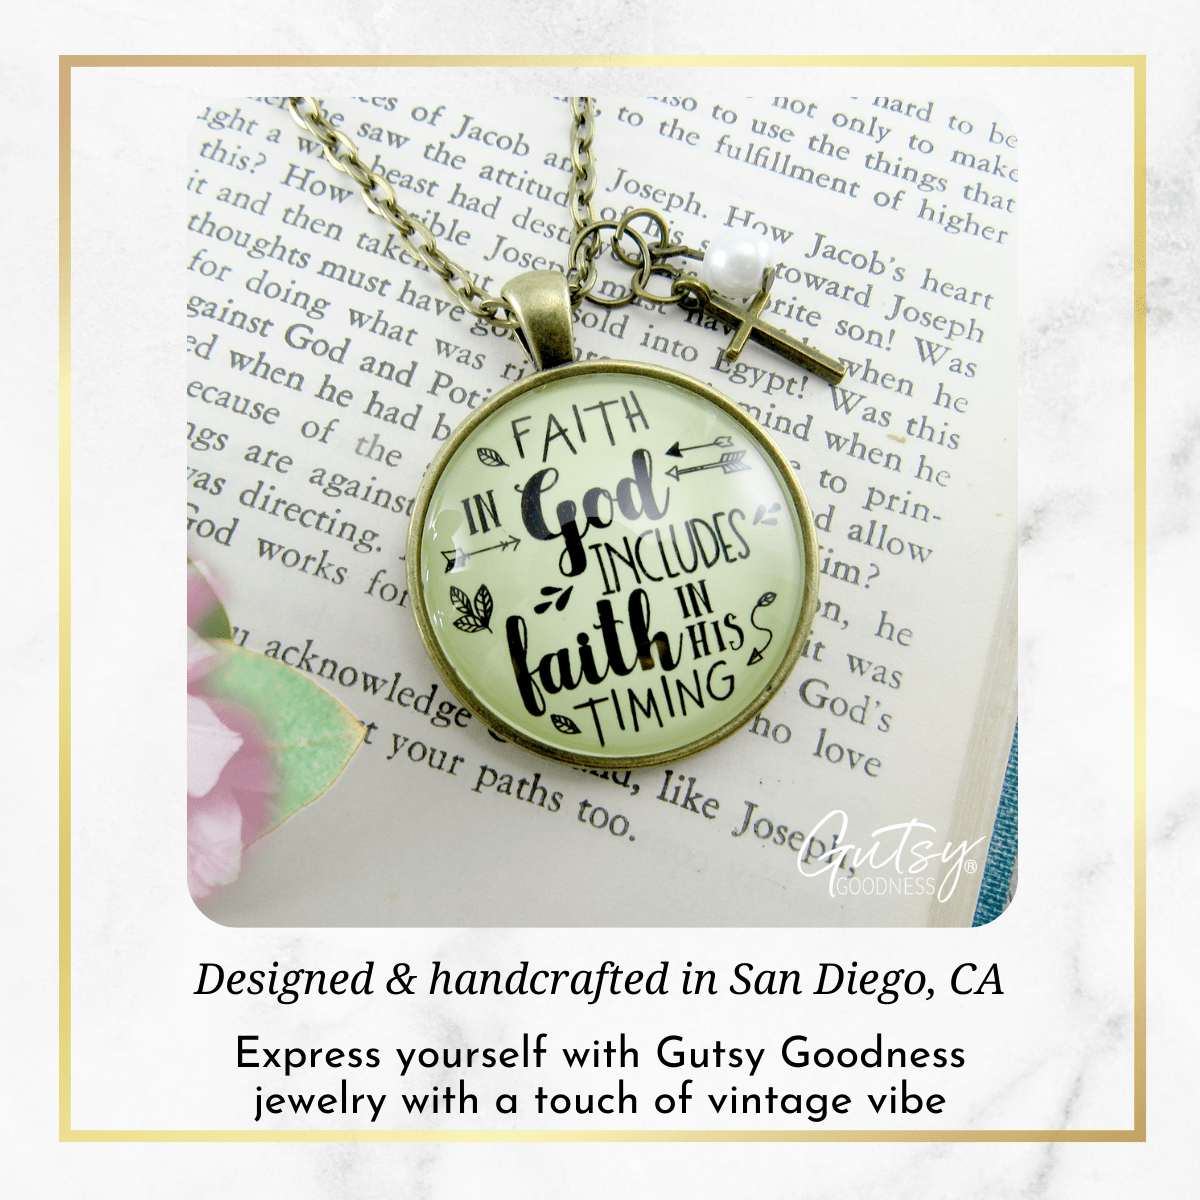 Gutsy Goodness Life Quote Necklace Includes Faith In His Timing Charm Jewelry - Gutsy Goodness Handmade Jewelry;Life Quote Necklace Includes Faith In His Timing Charm Jewelry - Gutsy Goodness Handmade Jewelry Gifts